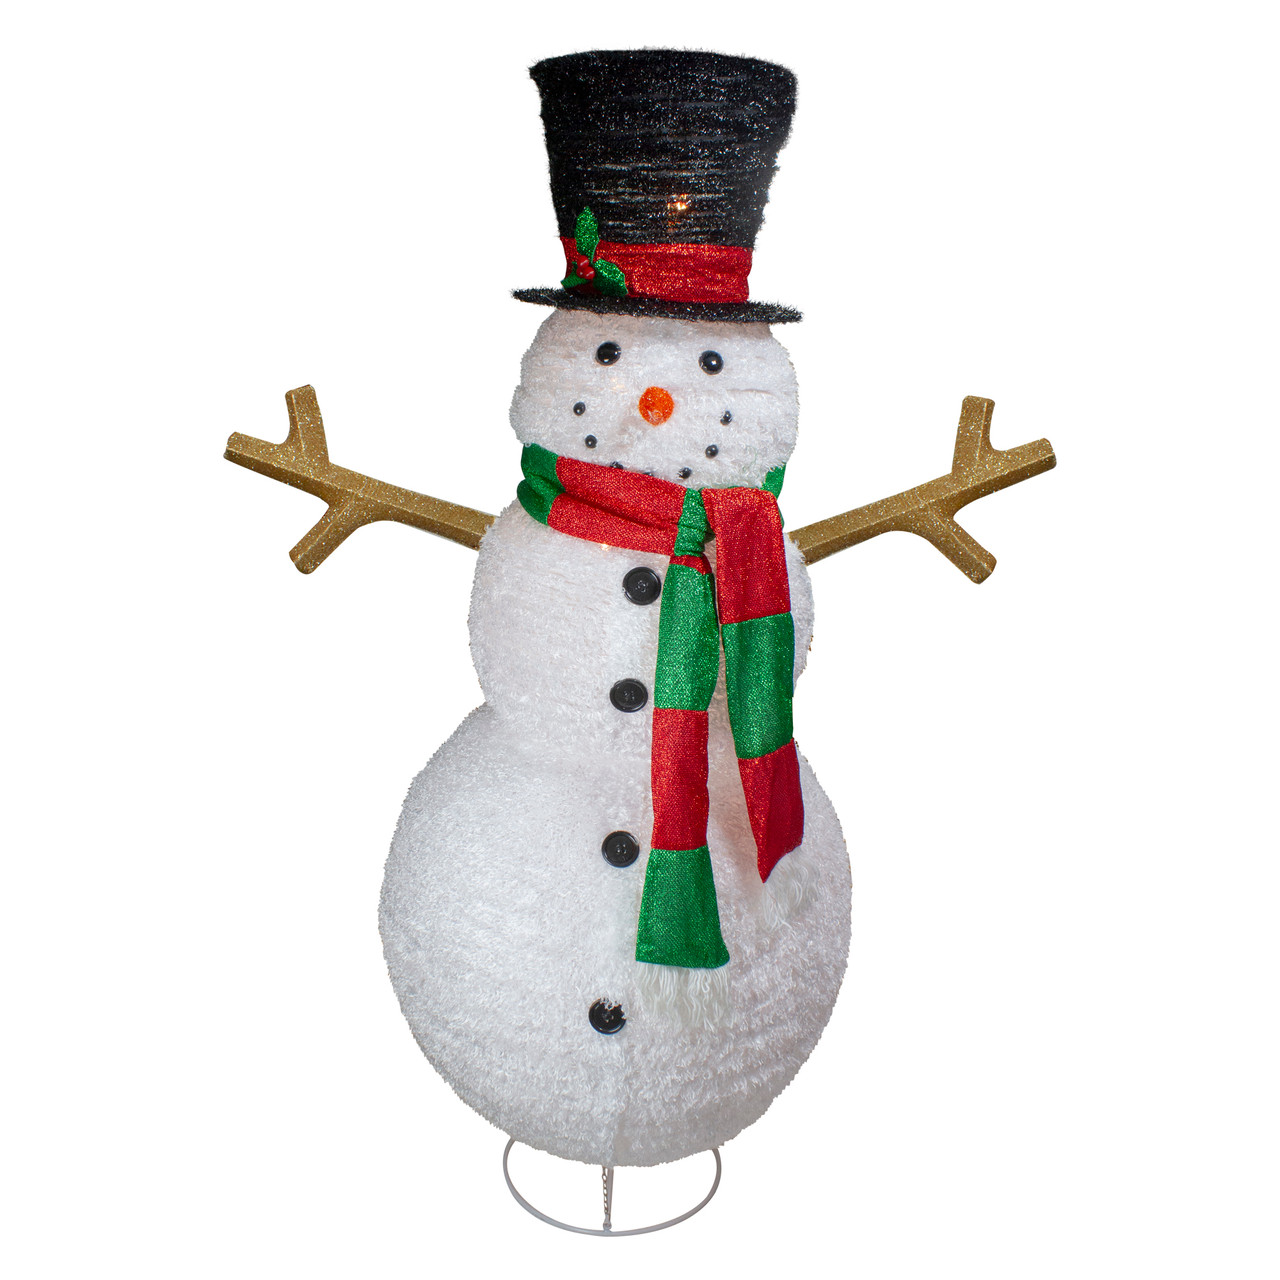 Reviews for Home Accents Holiday 6 ft. Iridescent Ribbon Snowman